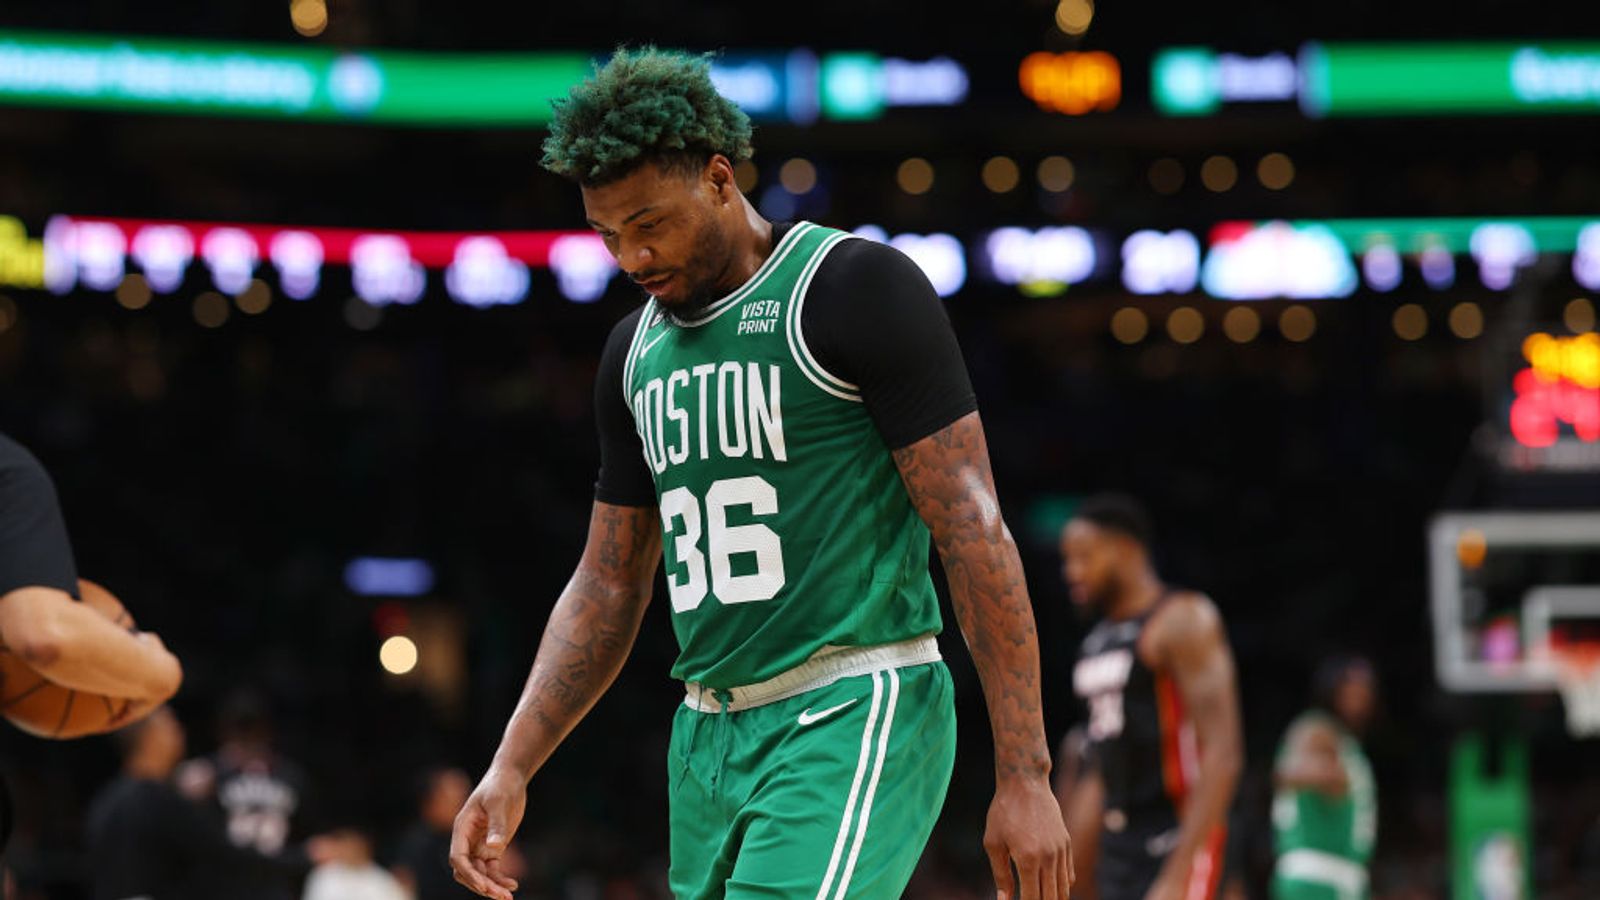 NBA Rumors: These 3 Teams Should Pursue Trade For Marcus Smart